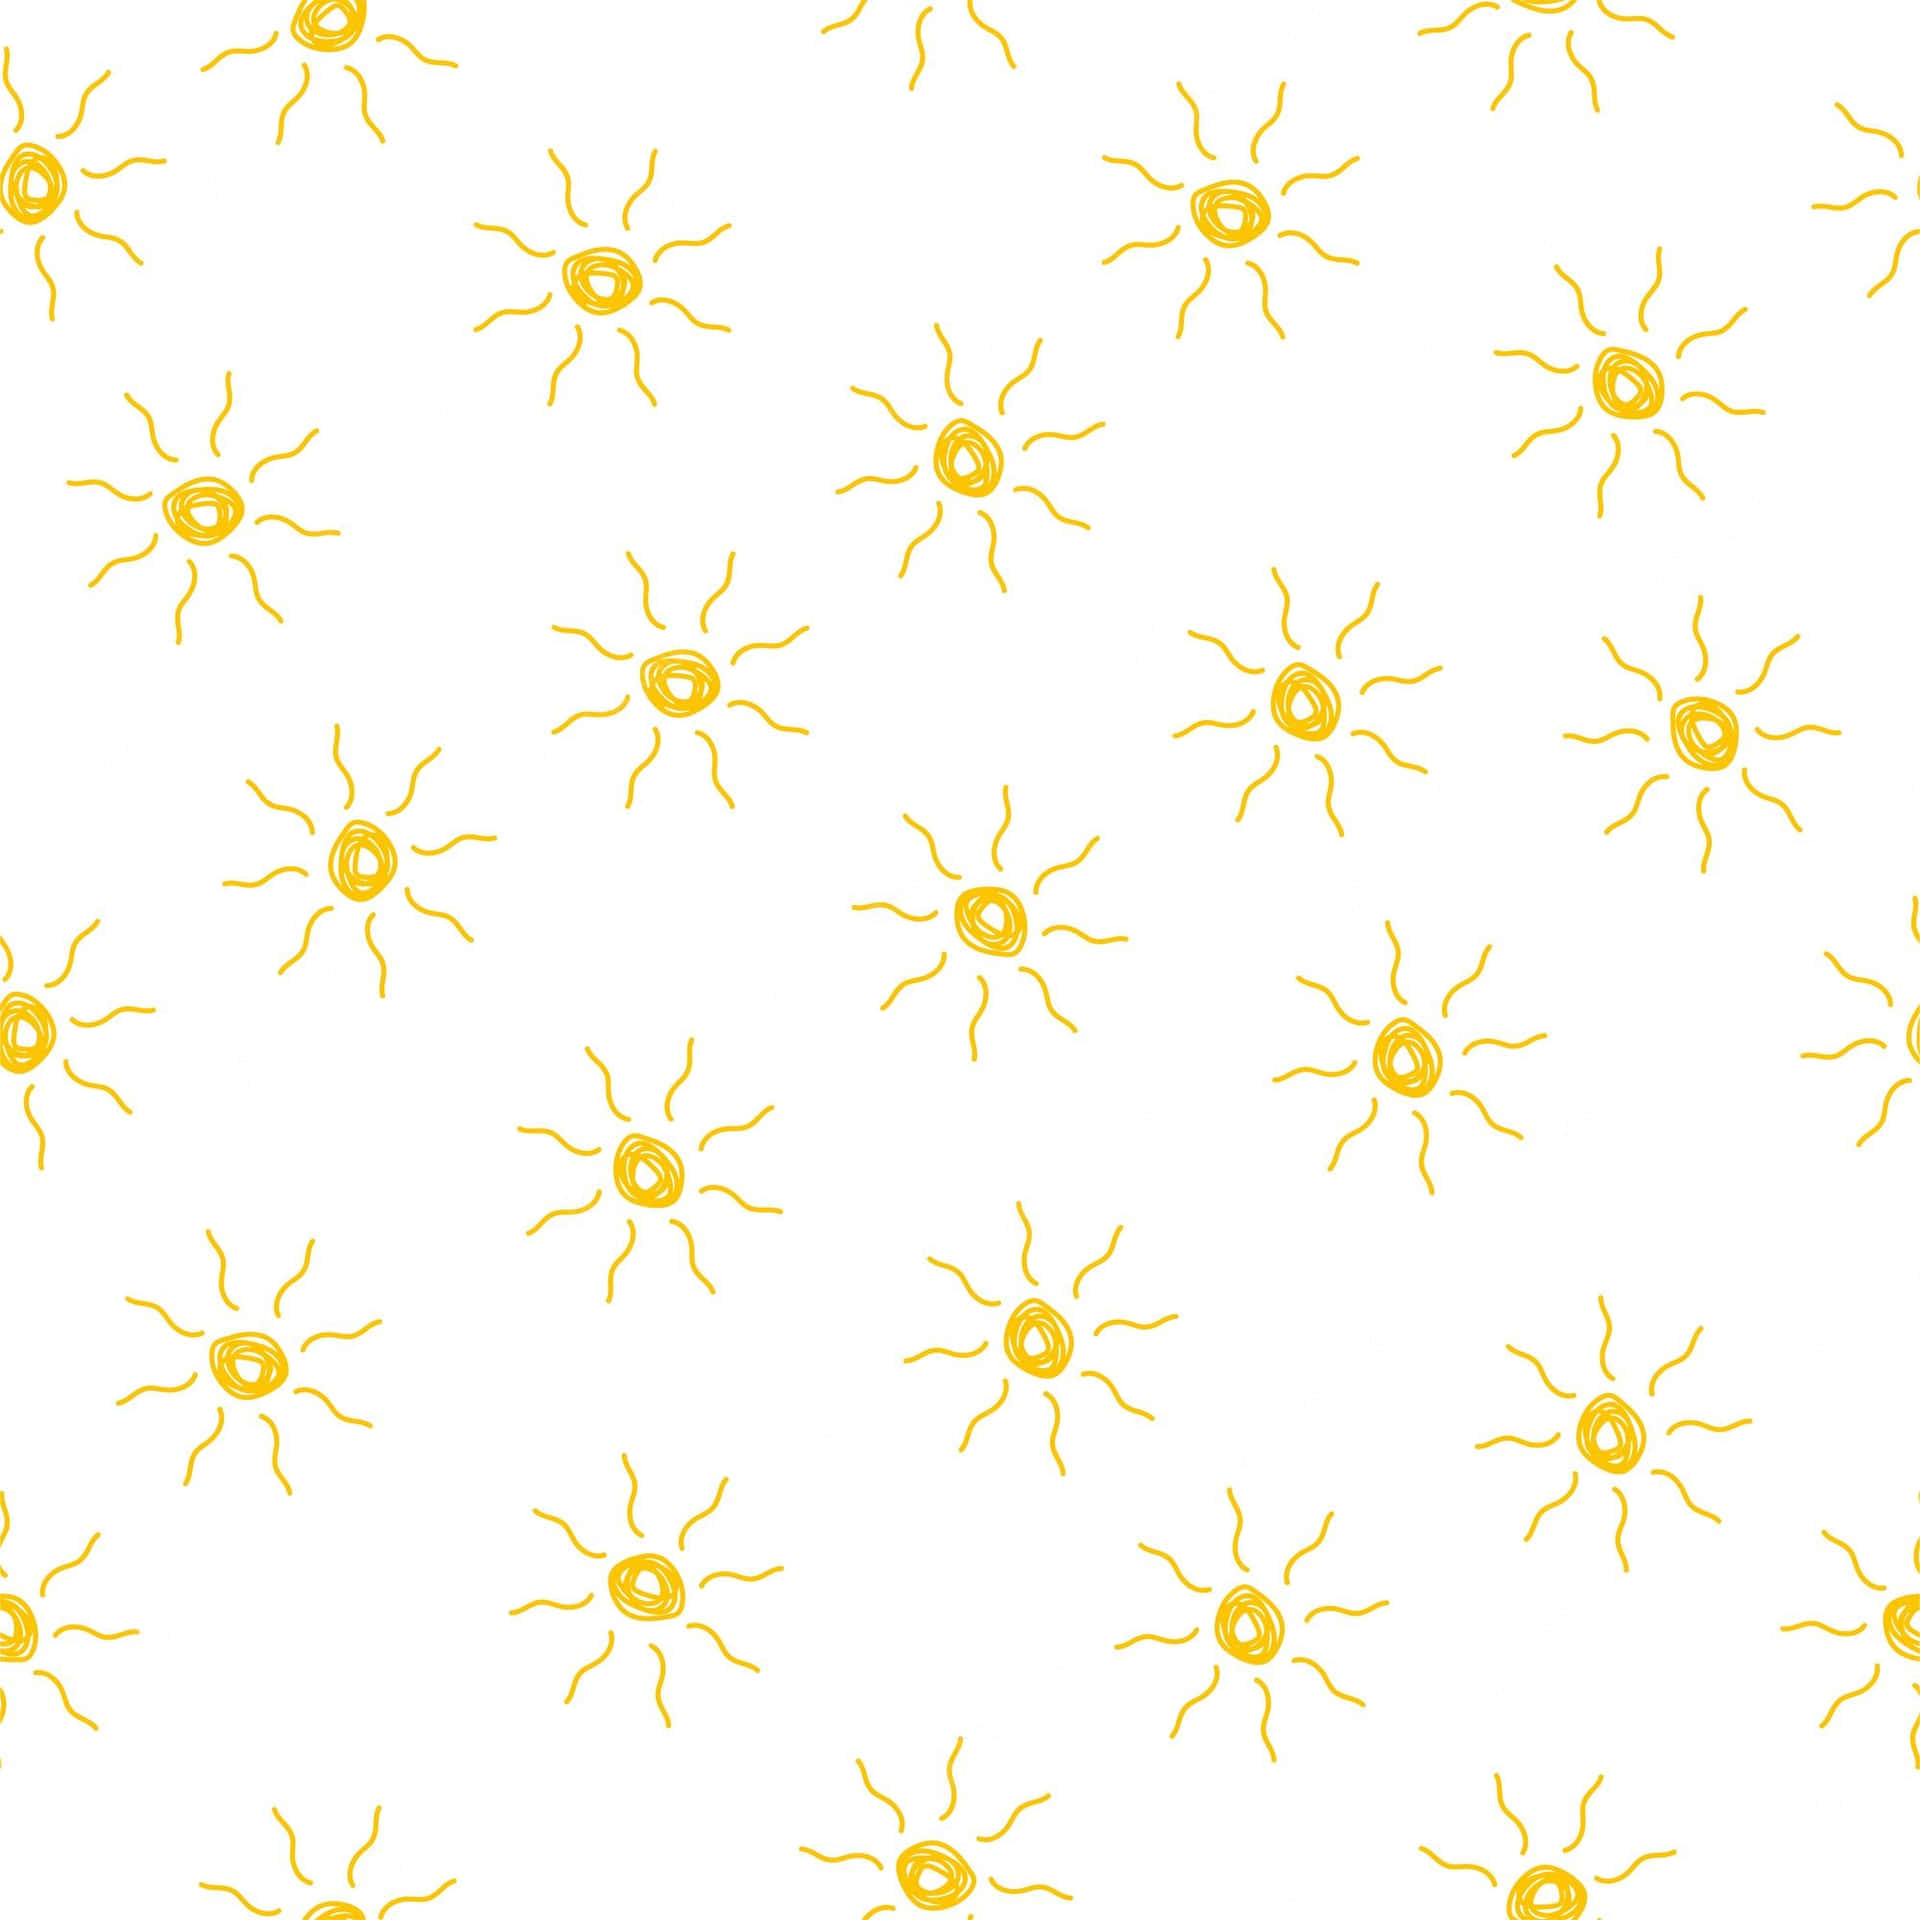 Brighten your day with some Cute Sunshine Wallpaper